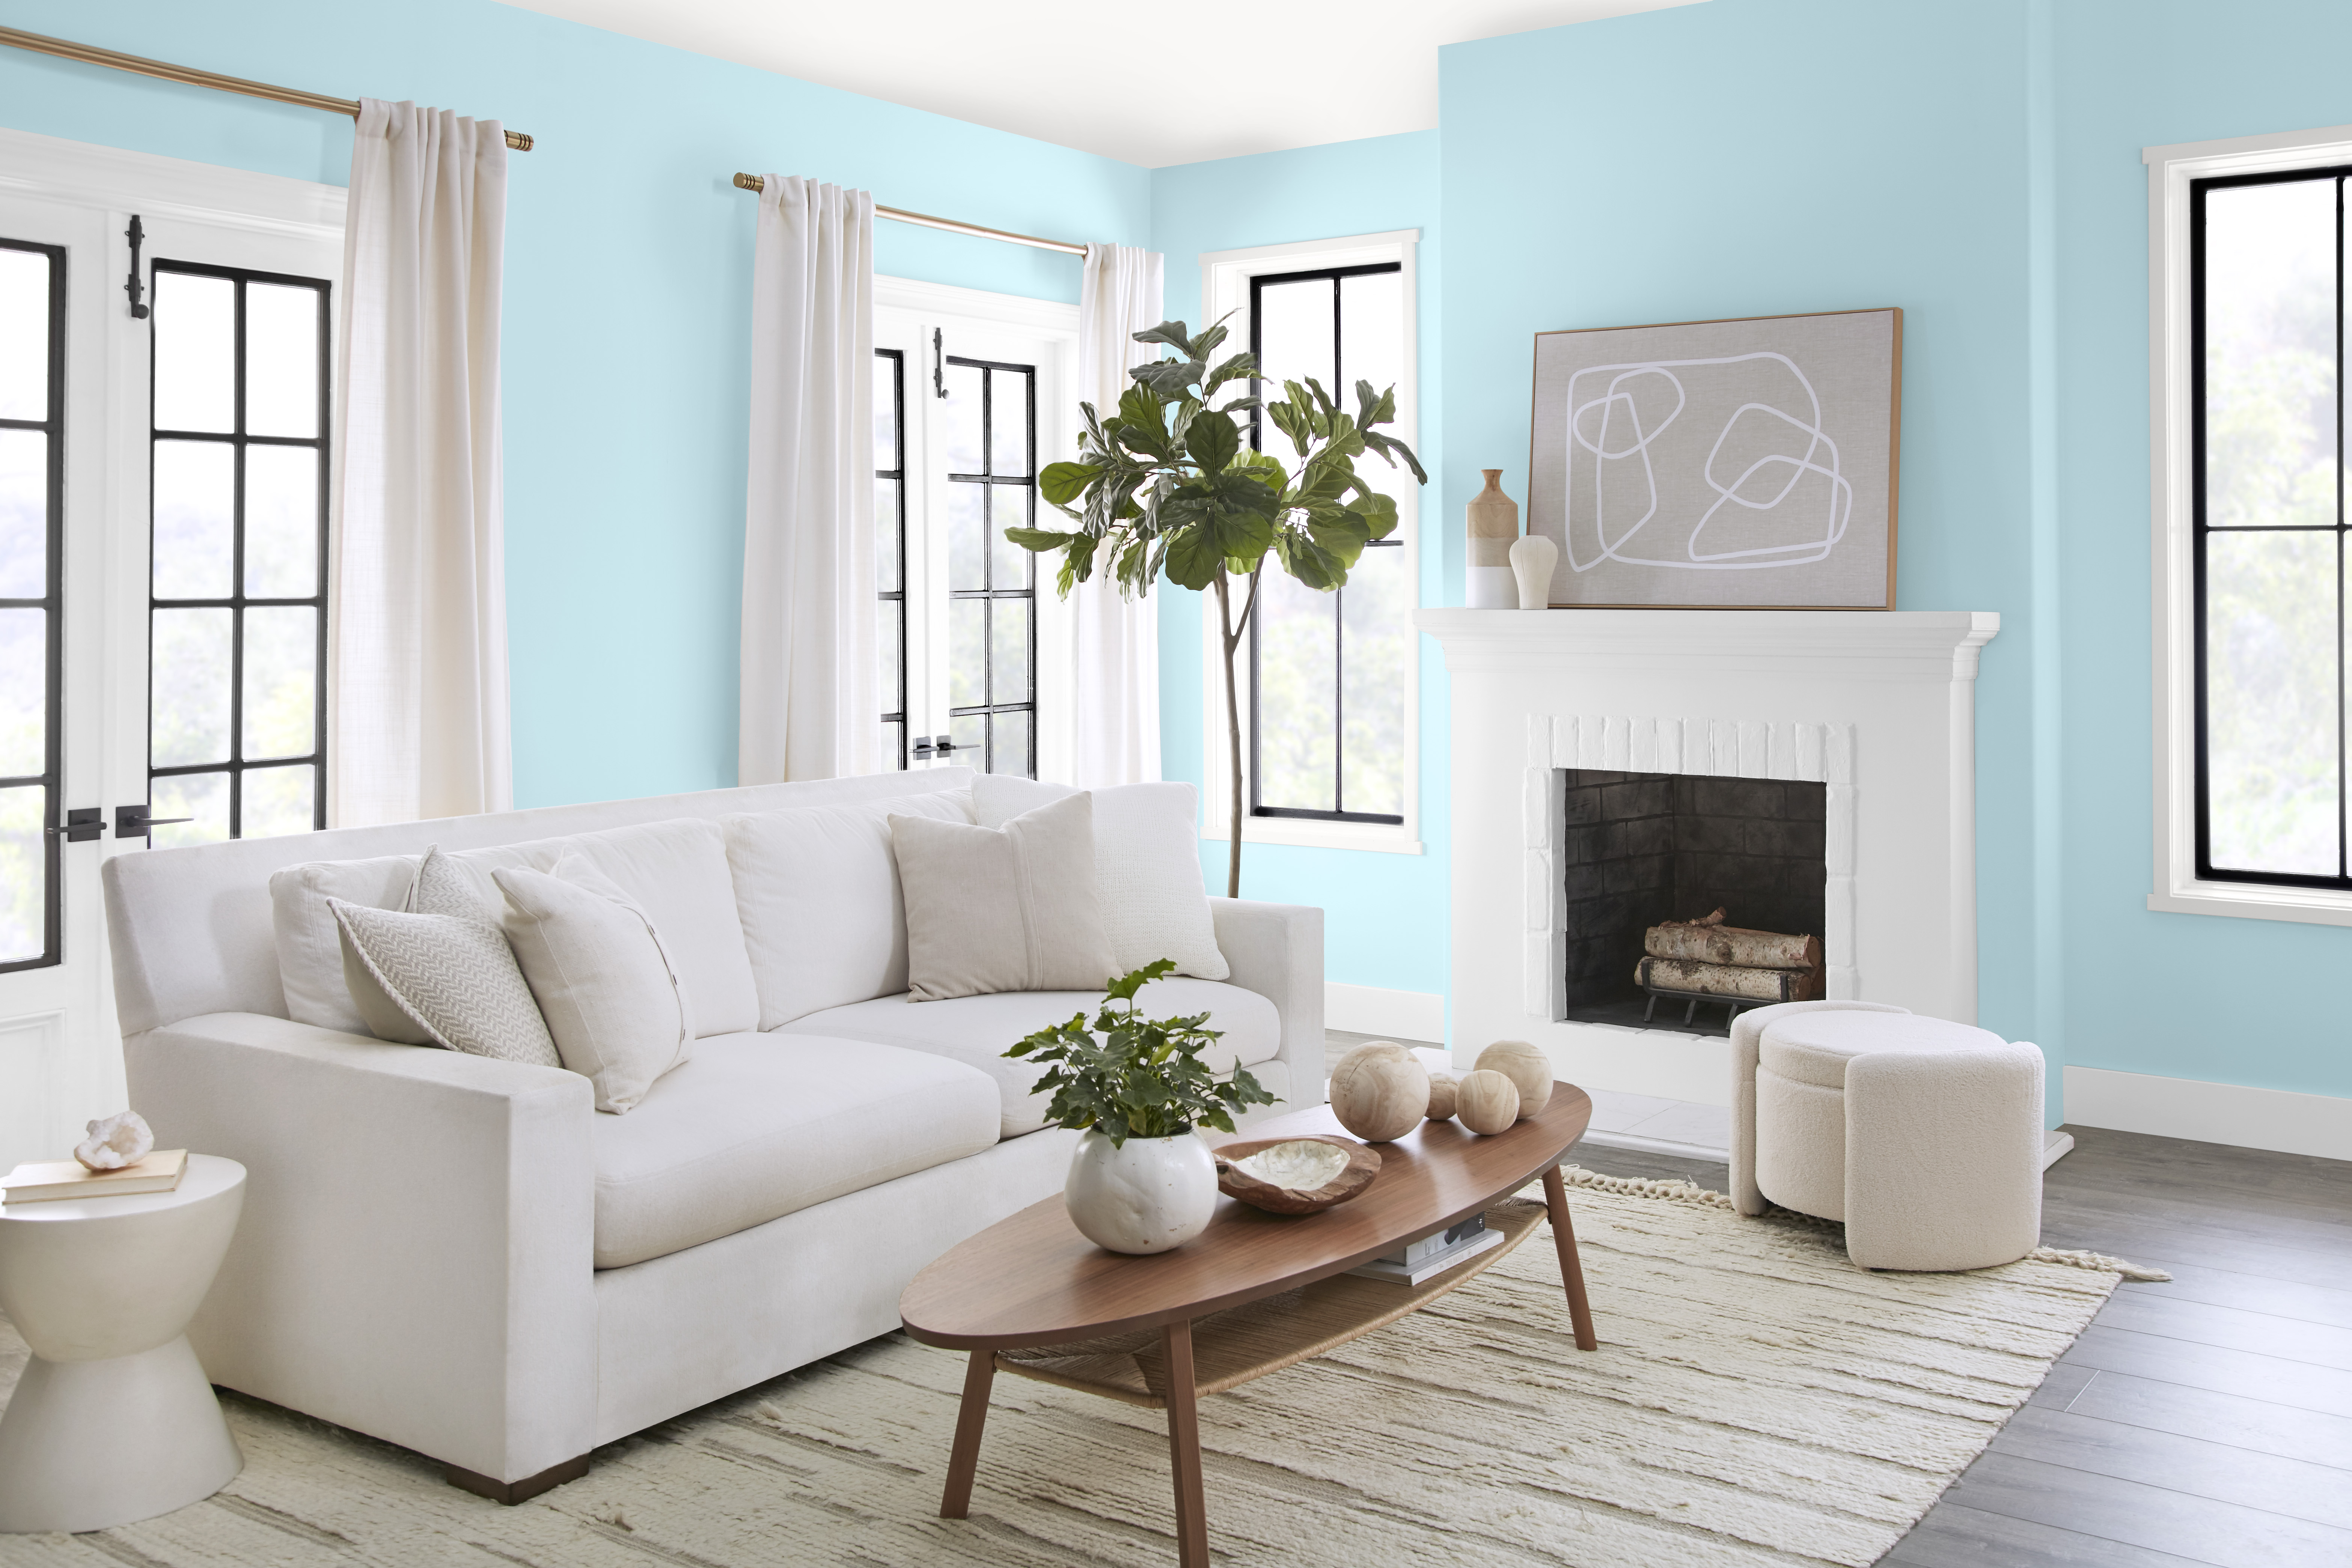 A bright living room with walls painted in a light blue colour, styled with white and neutral furniture and décor